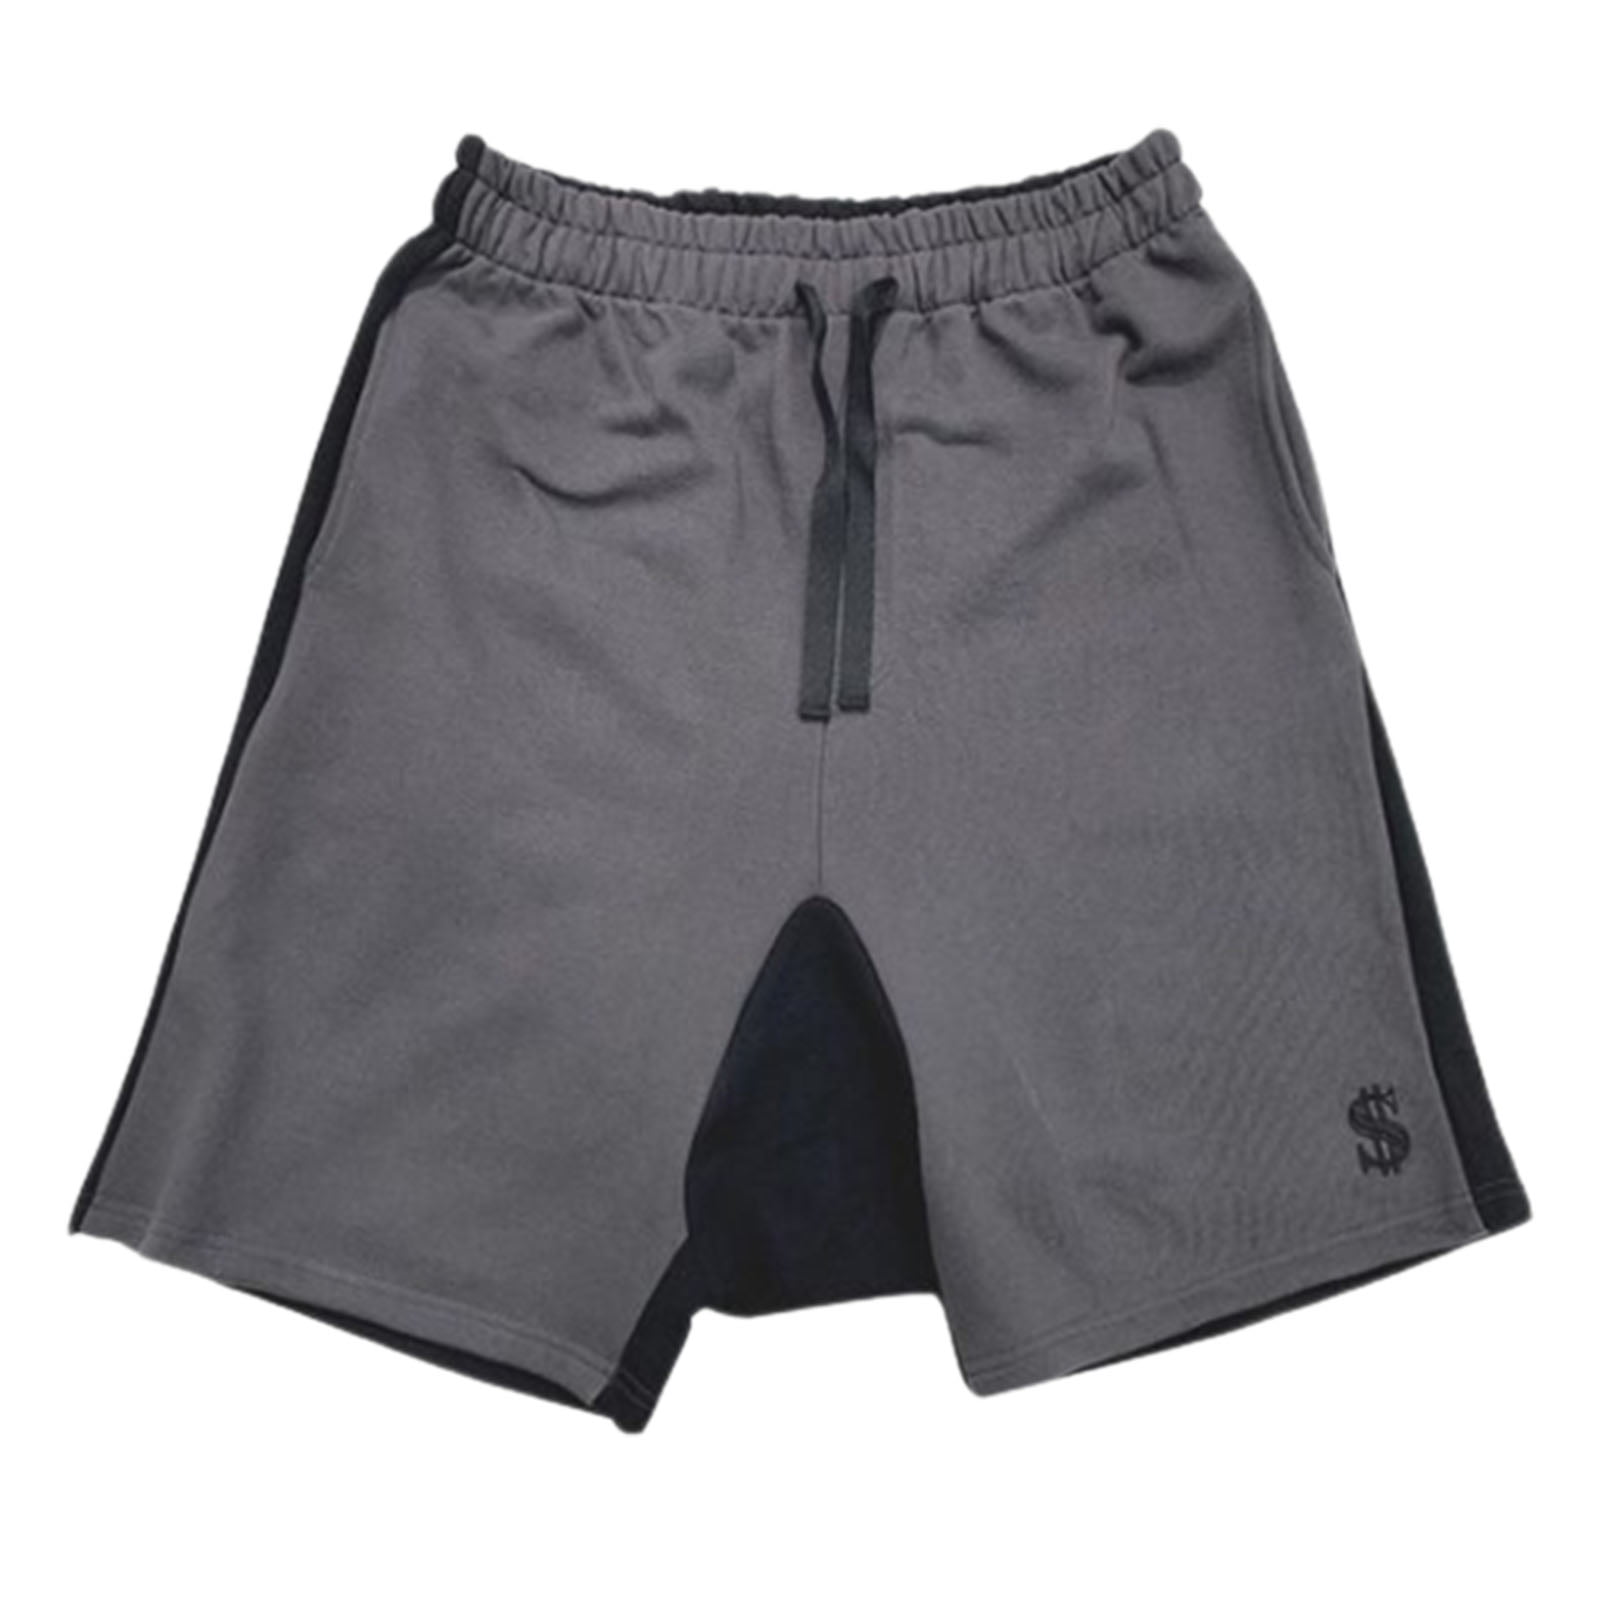 Details about   Precision Multisport Cycling Compression Shorts Unisex Adult Black 